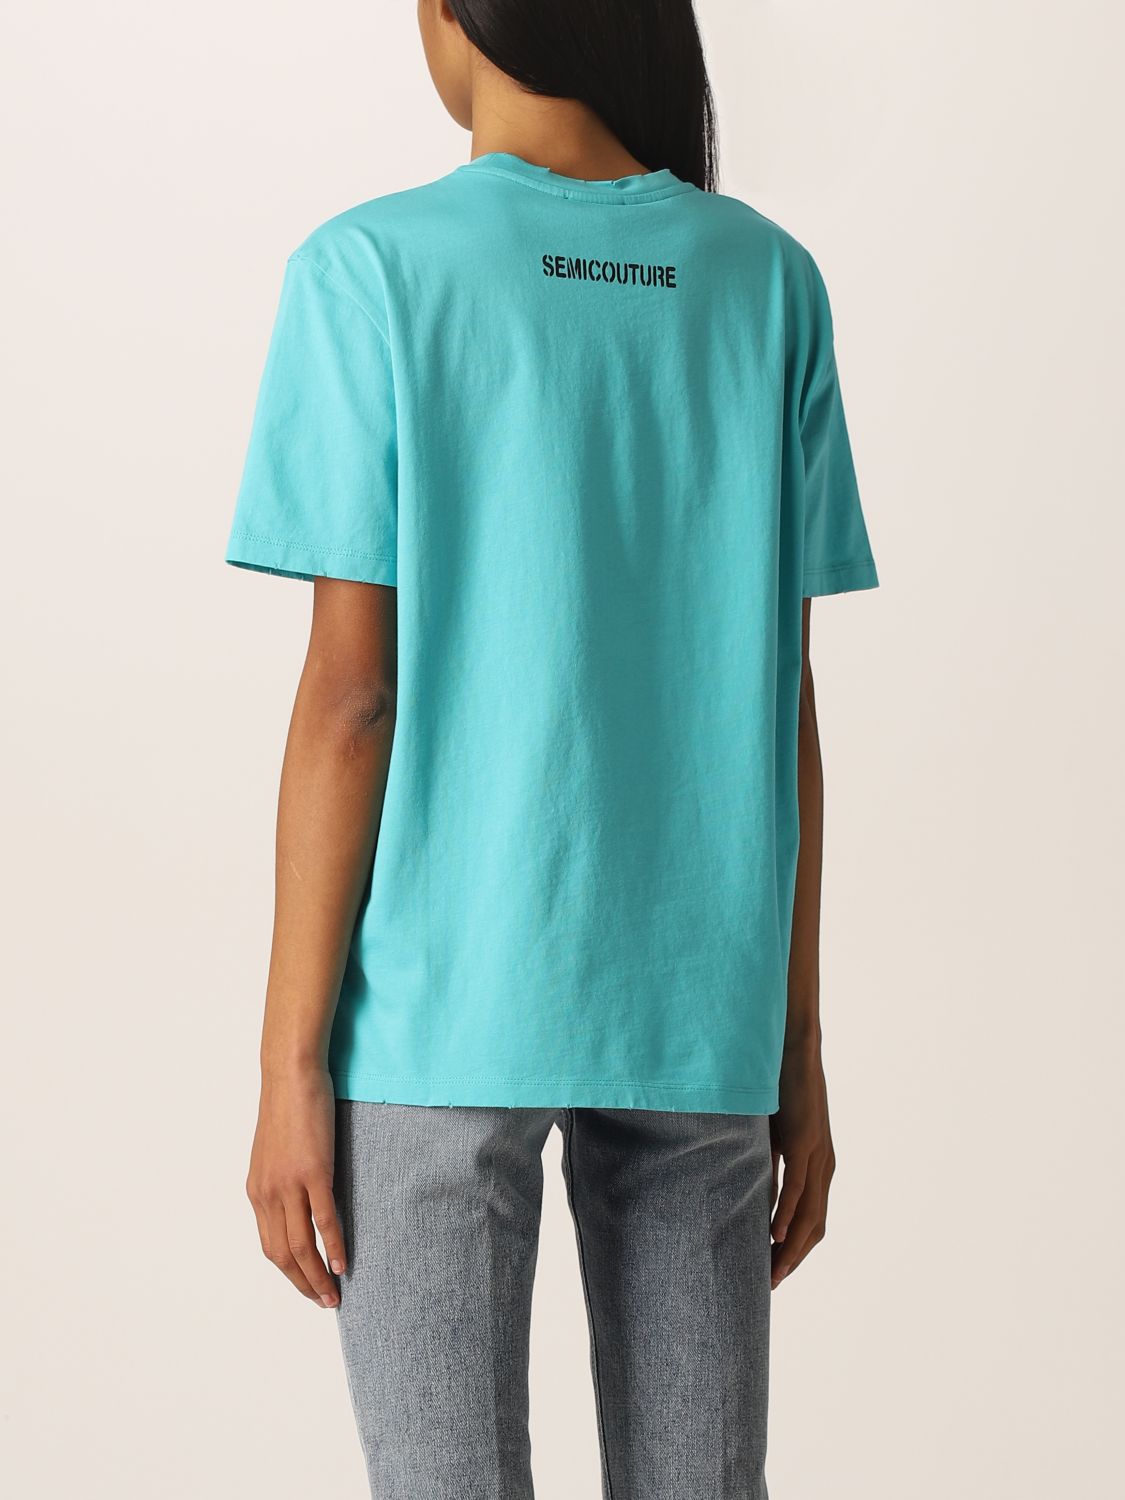 SEMICOUTURE: cotton T-shirt with logo - Gnawed Blue | Semicouture t